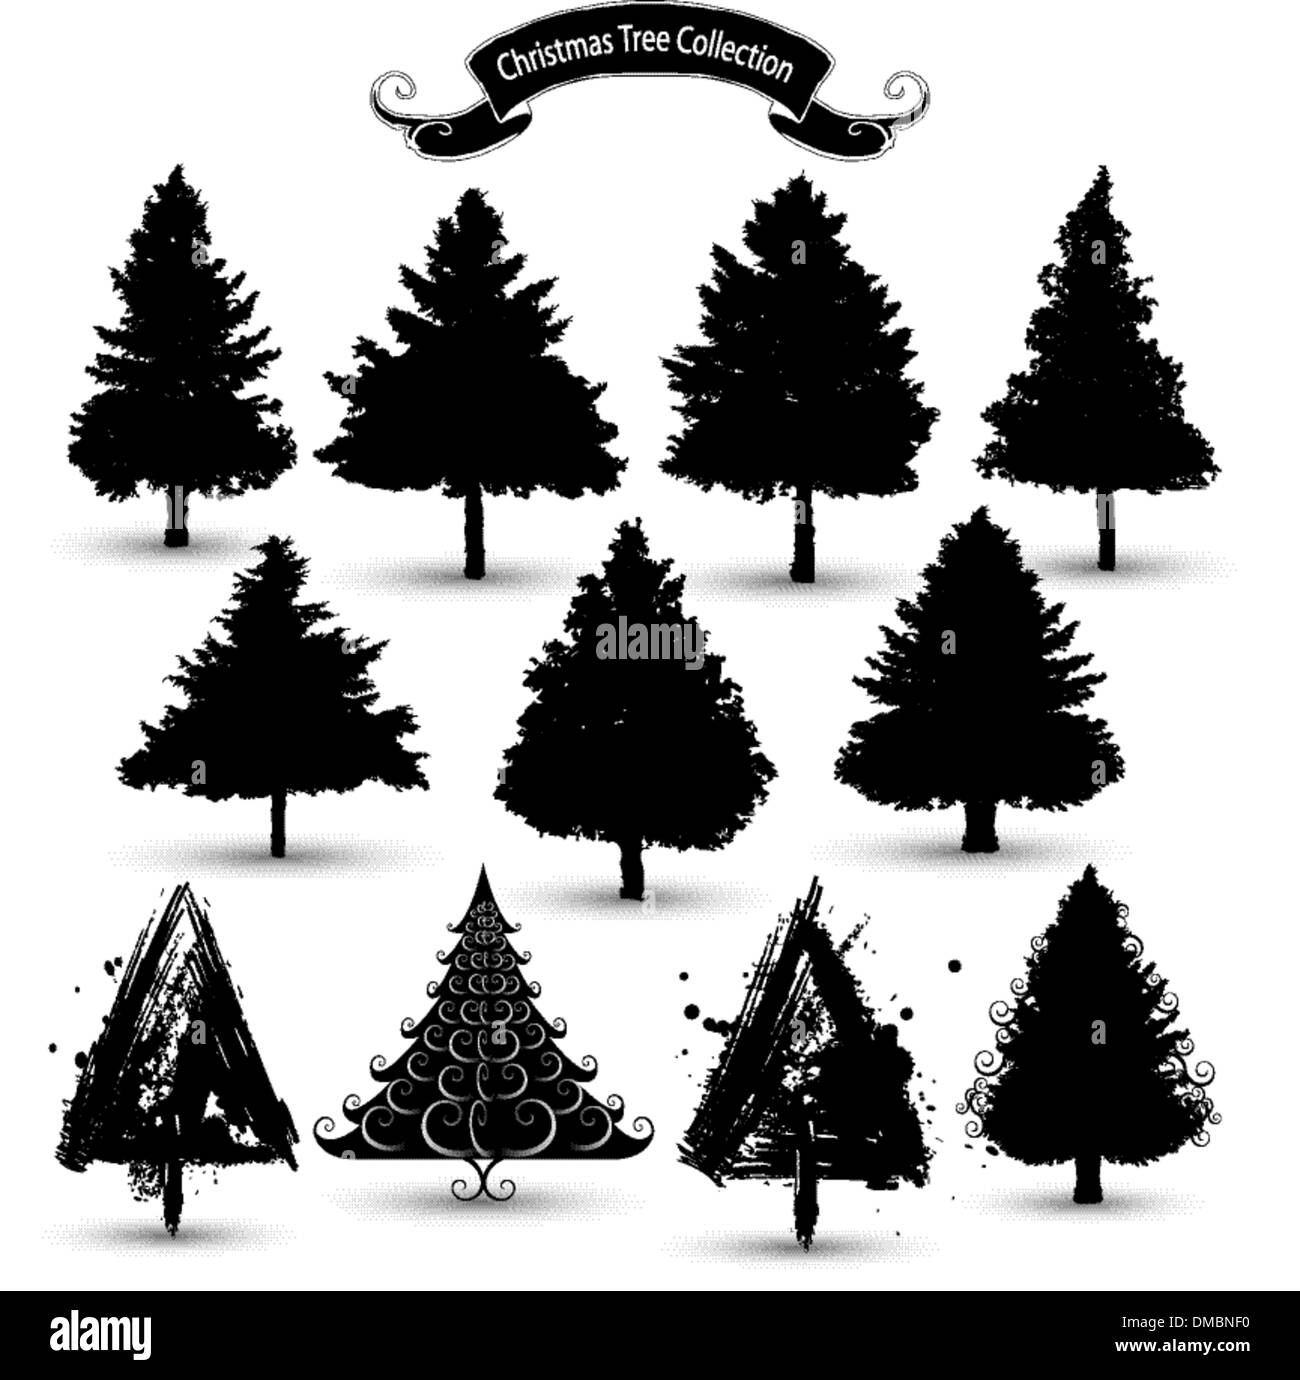 Christmas tree silhouettes Stock Vector